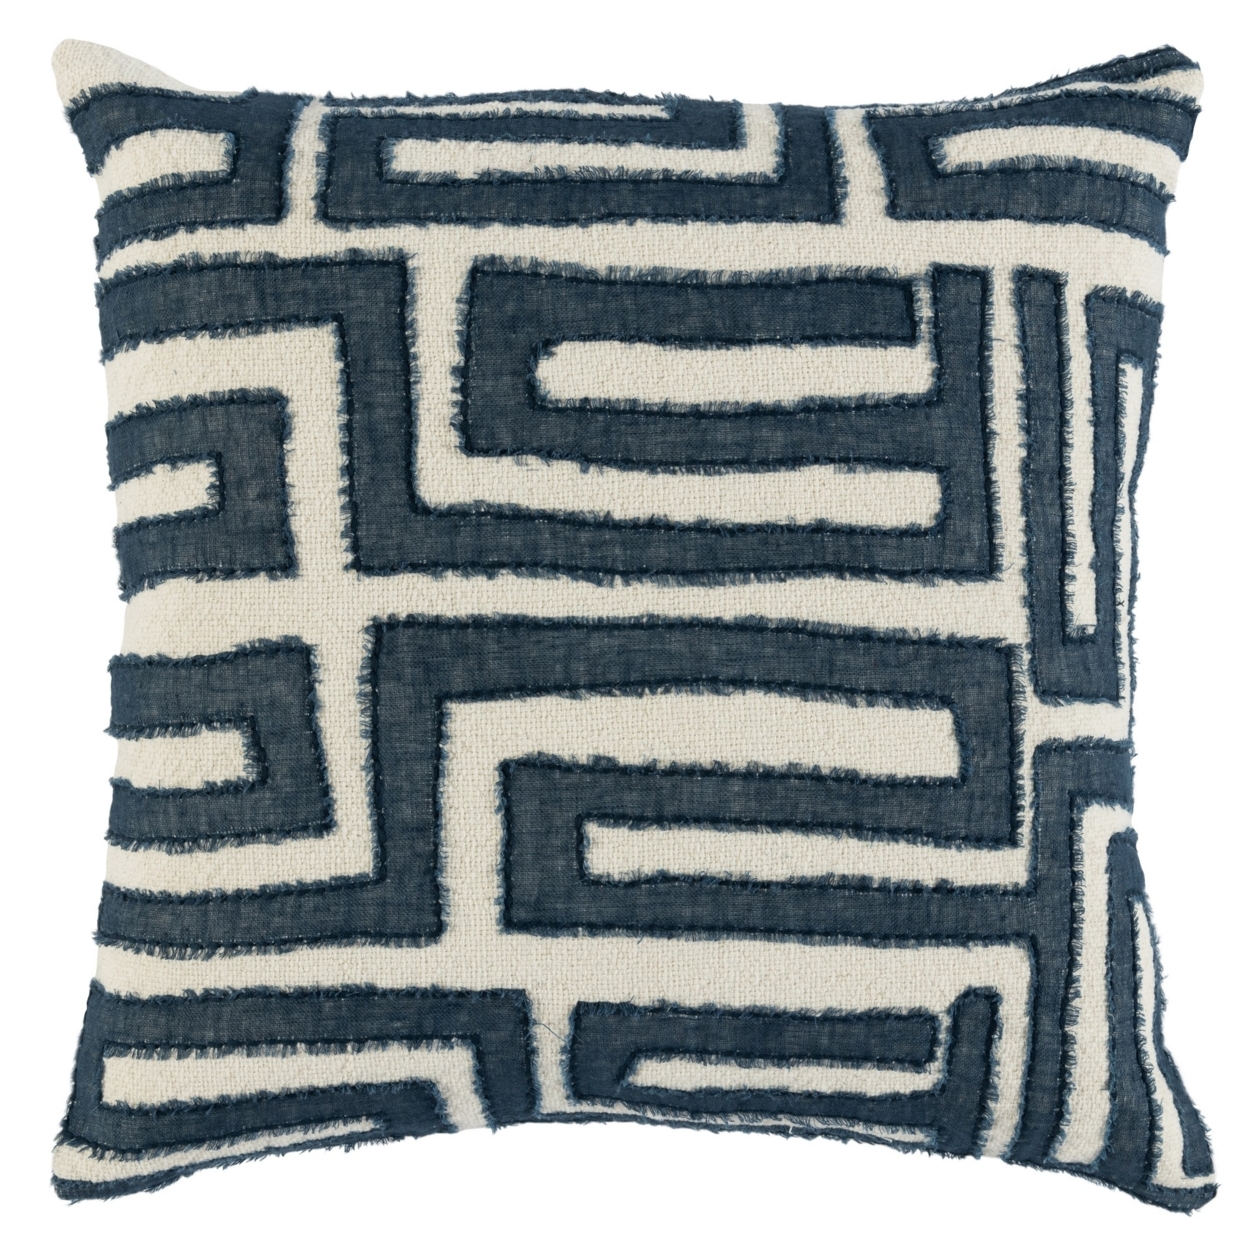 22 Inch Square Accent Throw Pillow, Hand Stitched Applique In Blue, Ivory- Saltoro Sherpi